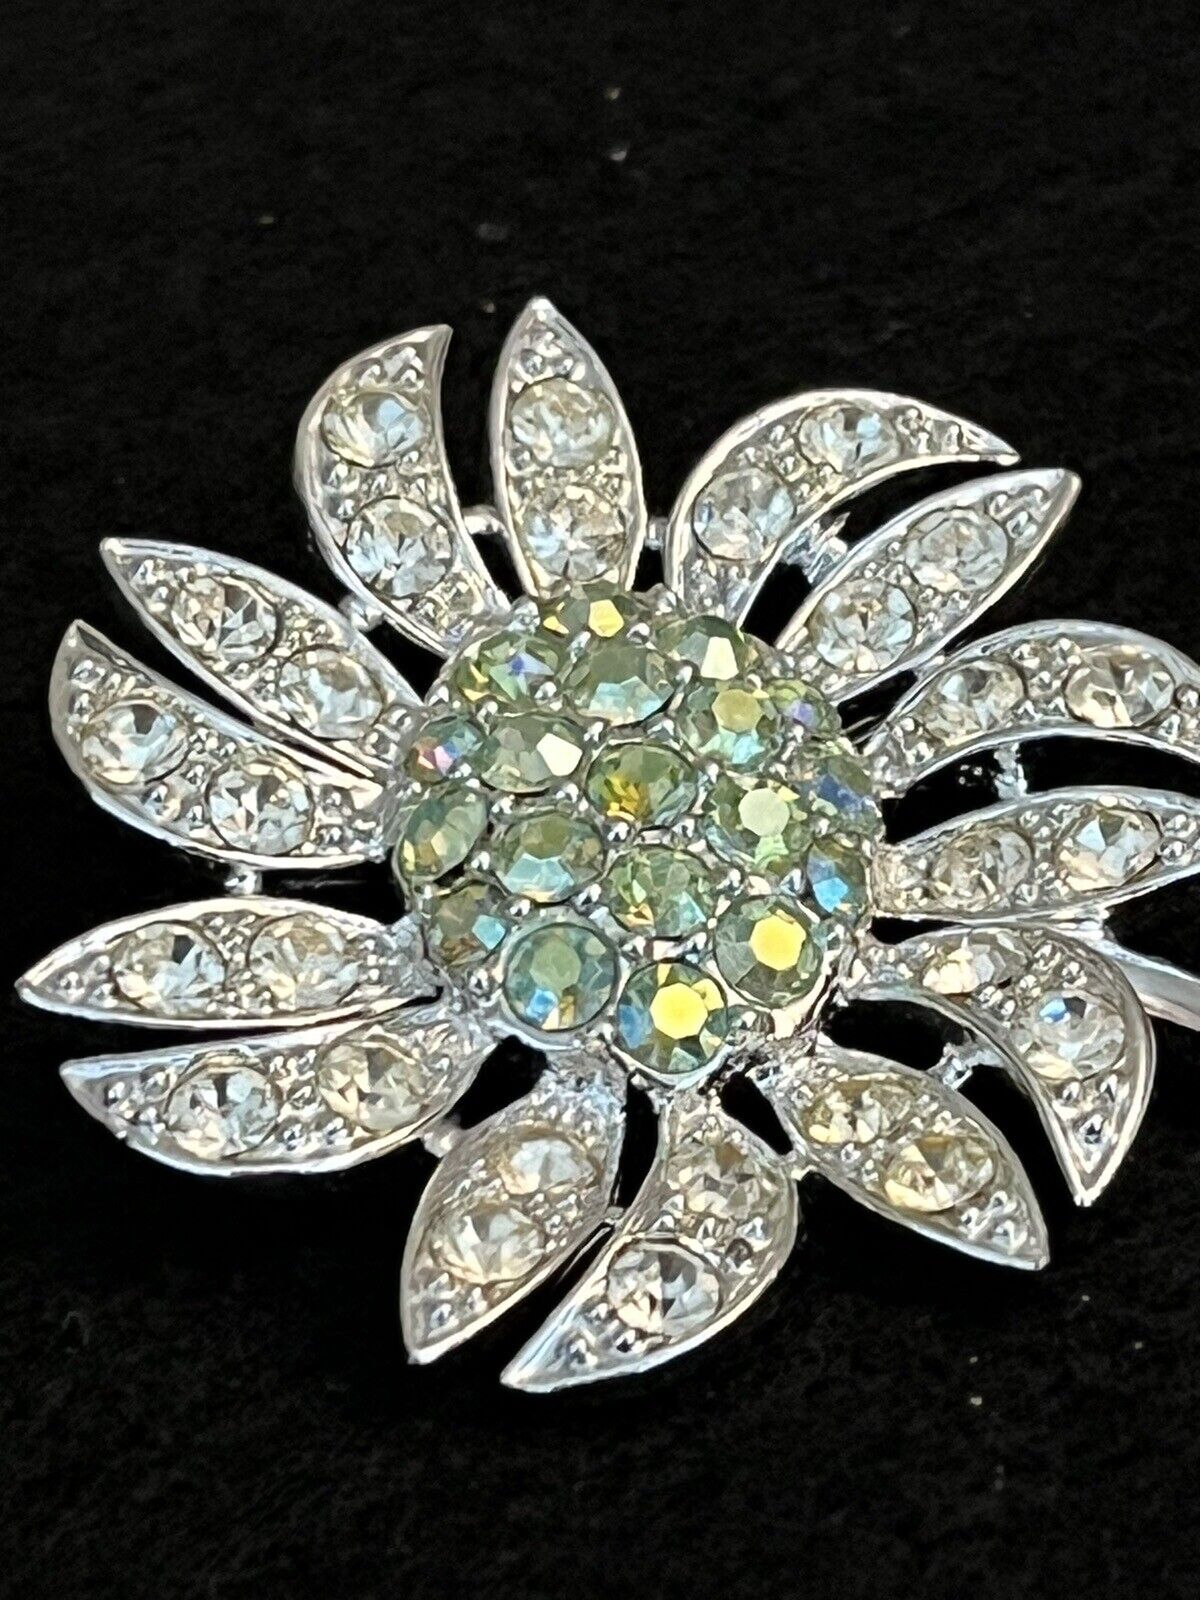 Vintage Sarah Coventry Flower Brooch In Silvertone with AB Stones